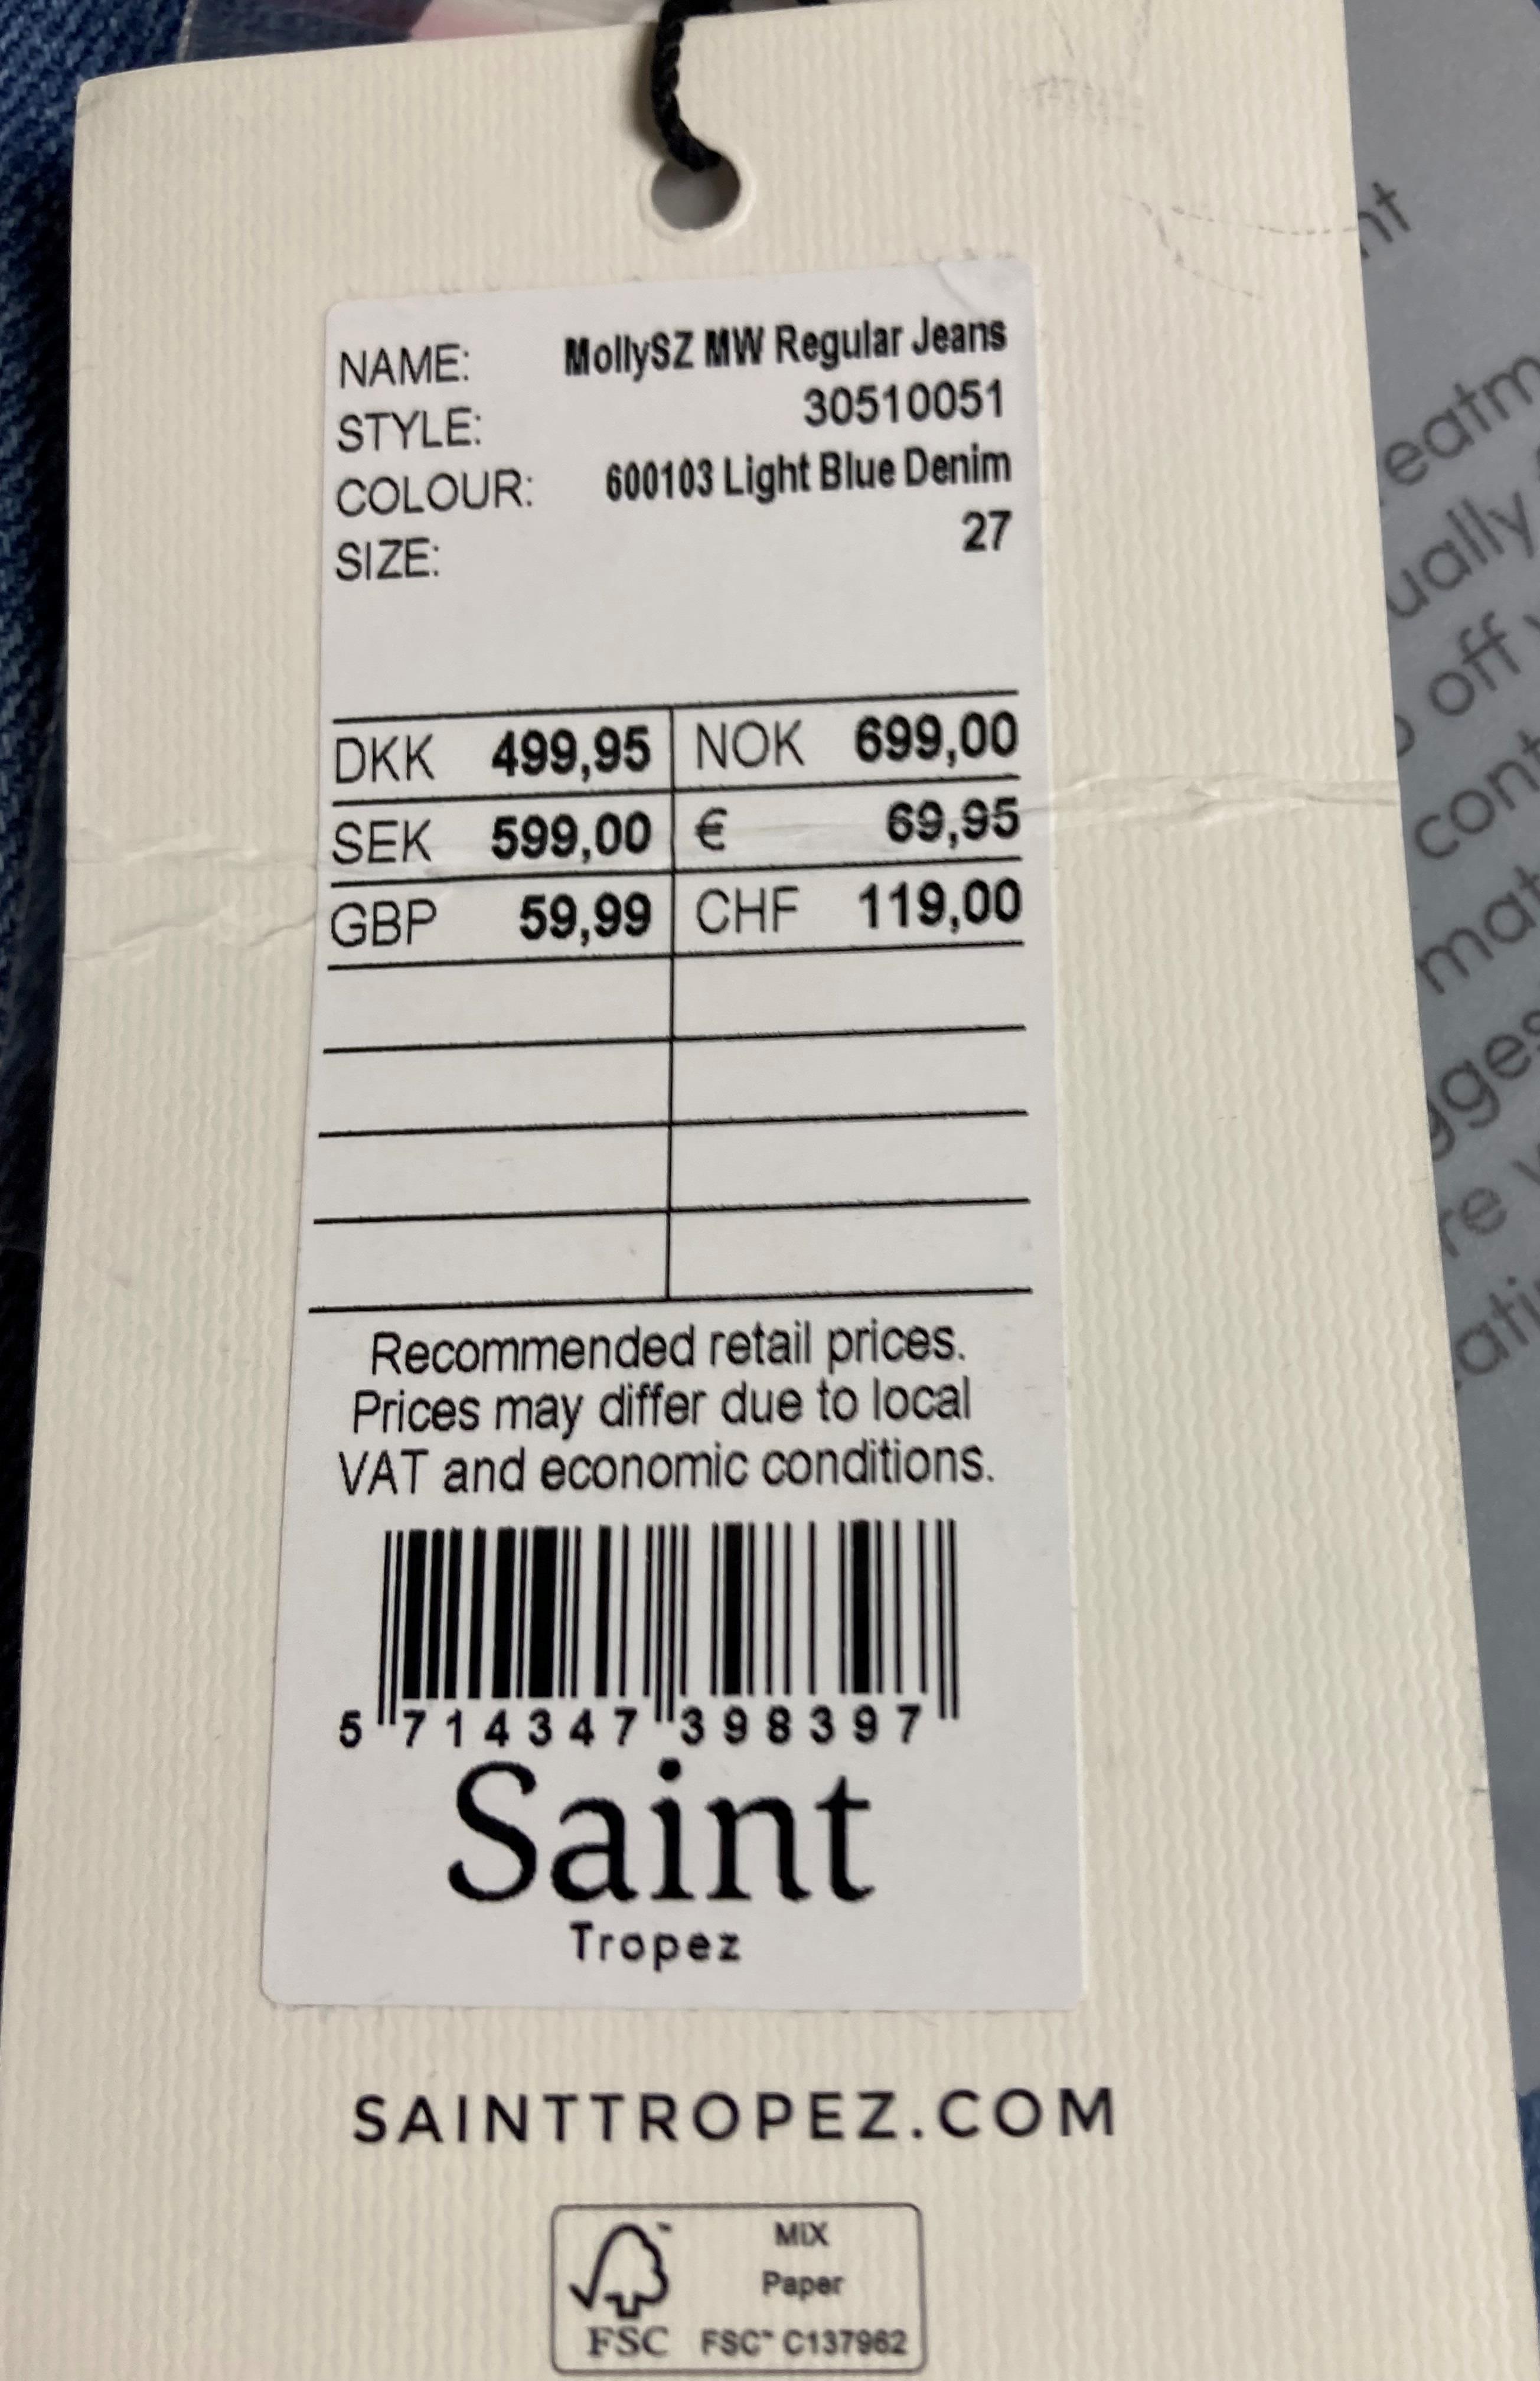 2 x pairs of SAINT TROPEZ light blue ladies jeans in sizes 27 and 32 - RRP: £59. - Image 2 of 2